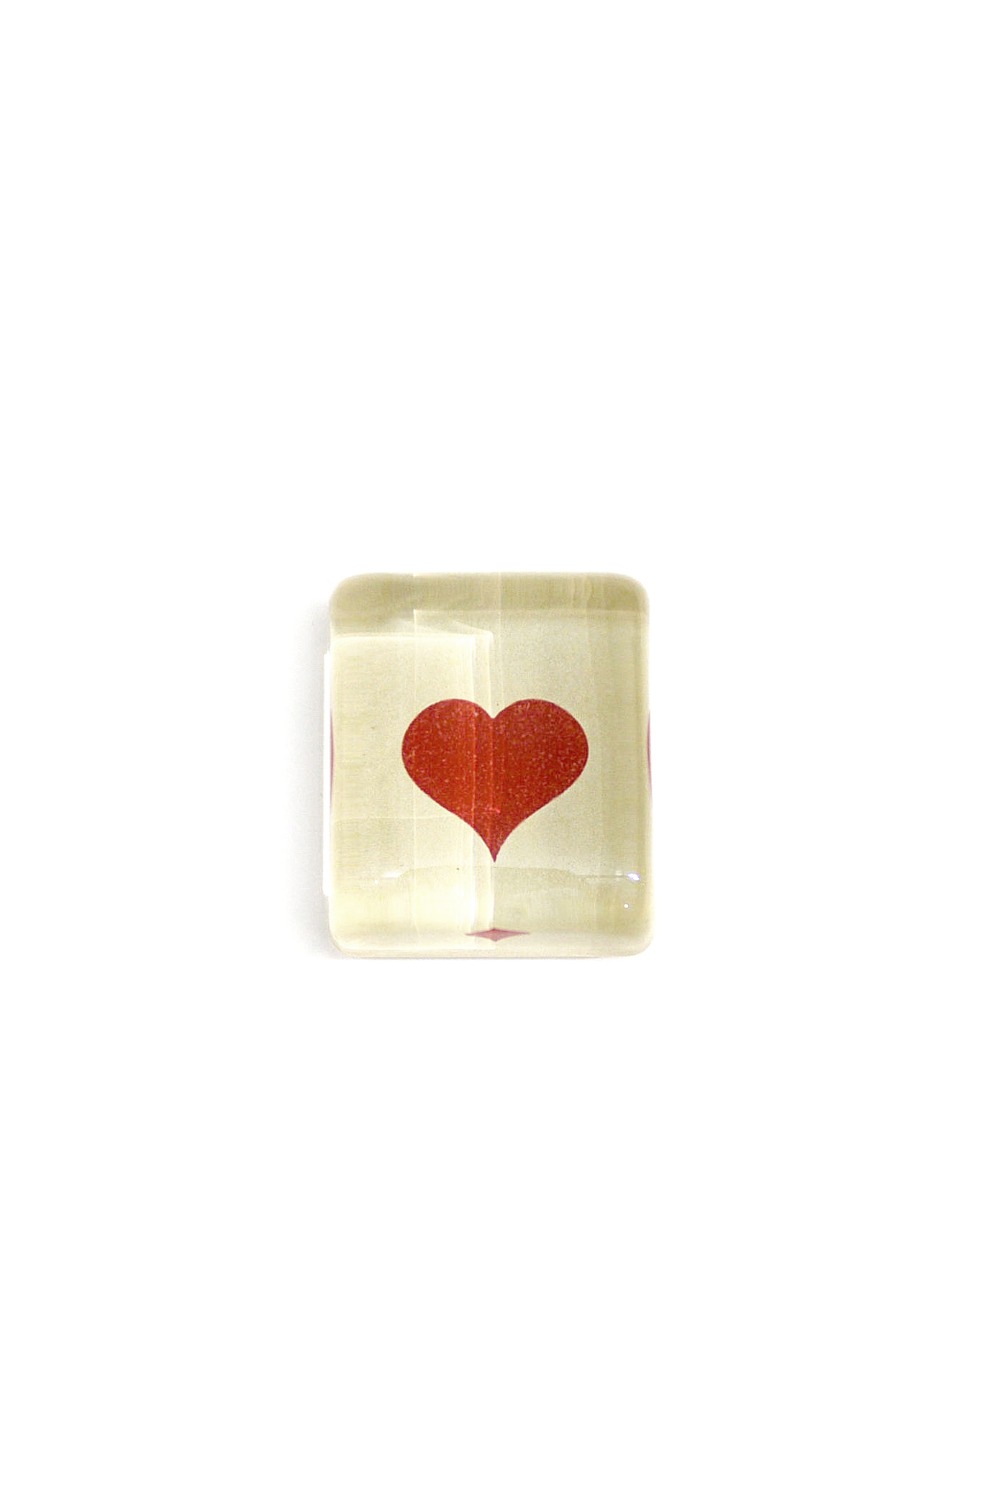 Rectangular Charm Paperweights - Blood Red Heart